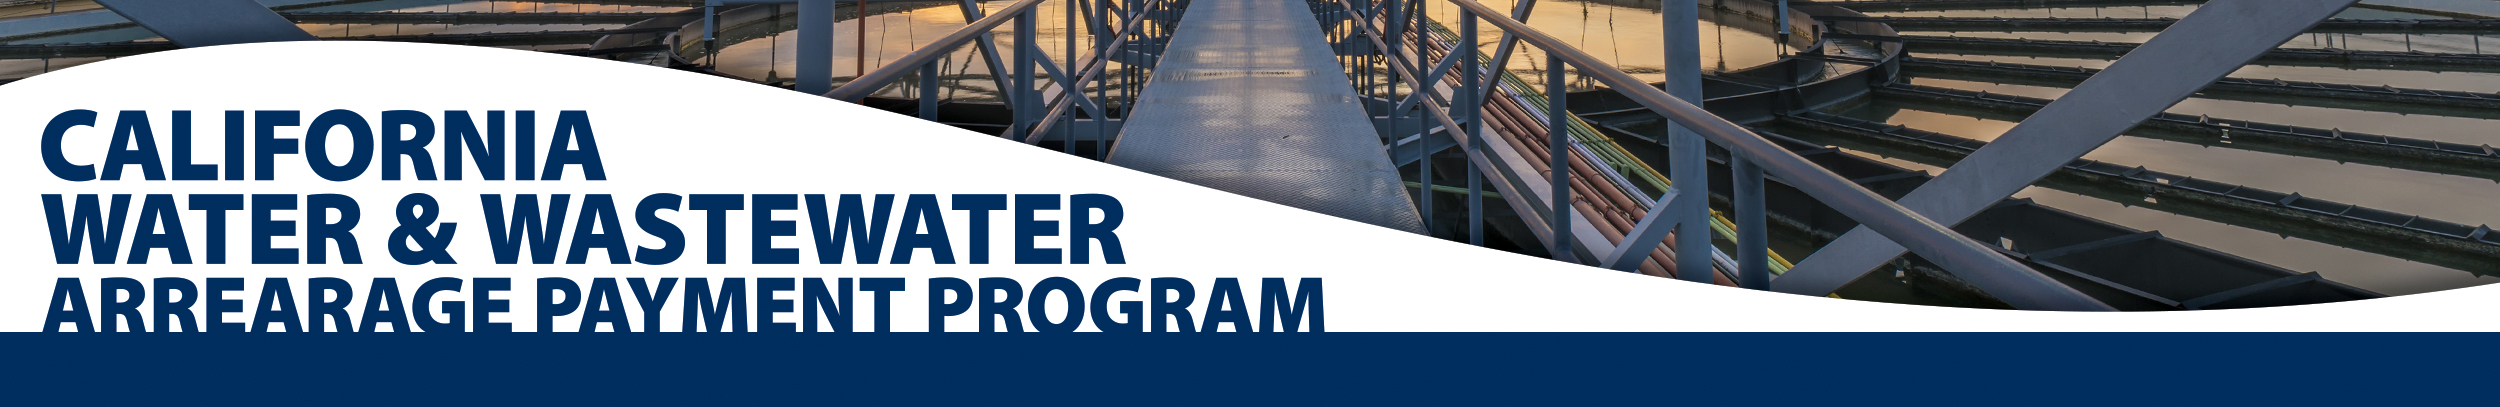 Water and Wastewater Arrearage Payment Program Banner